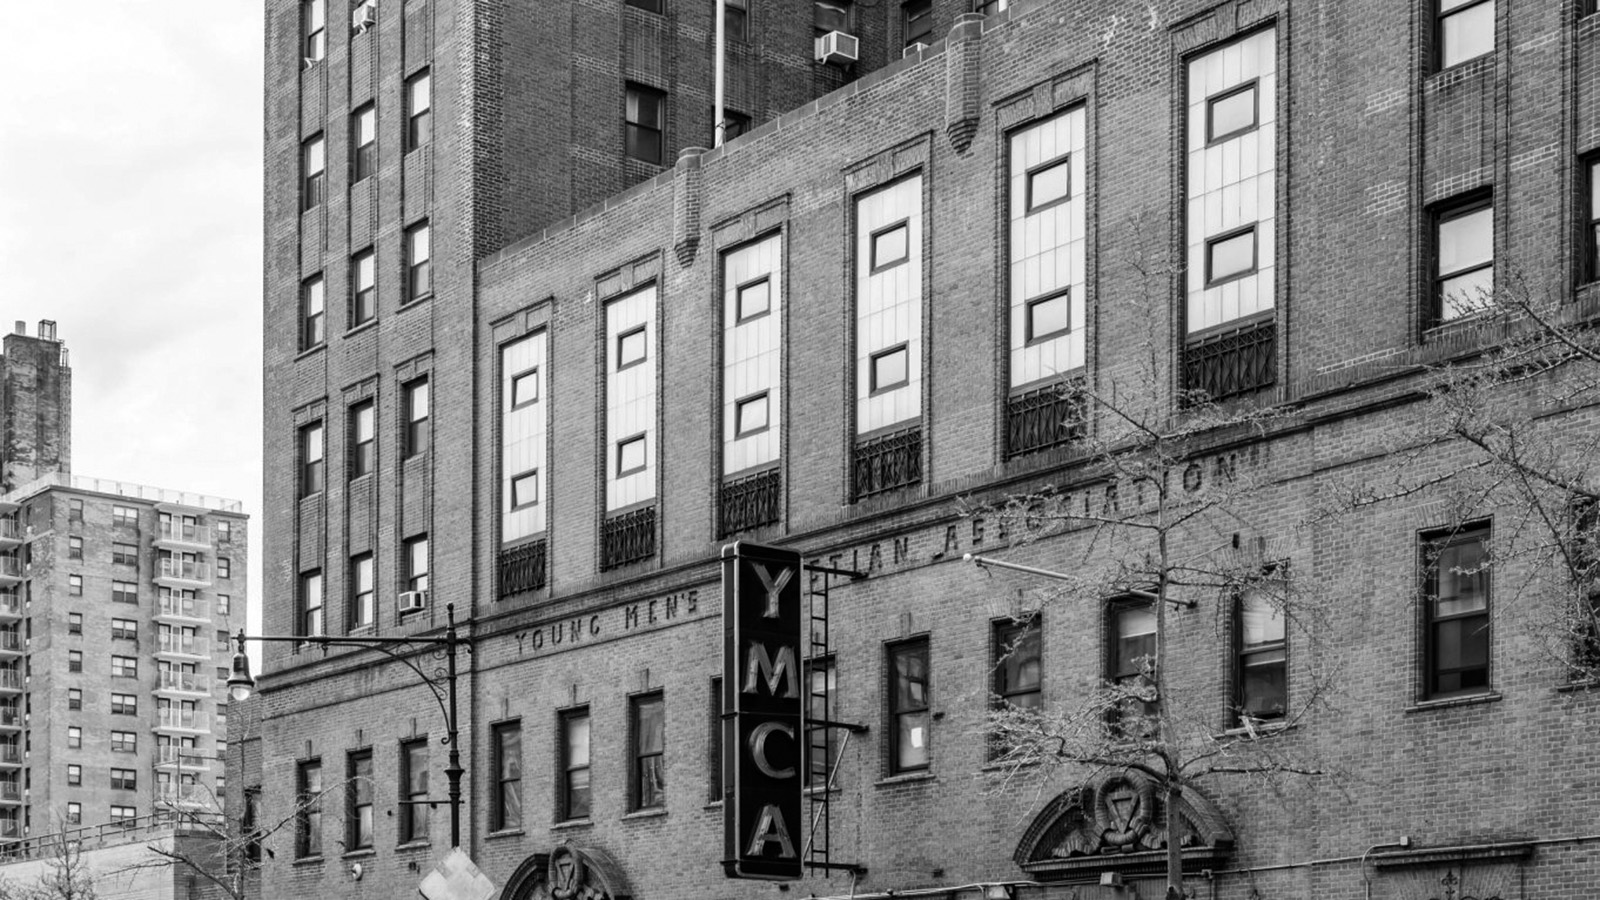 A black-and-white image of the front of the Harlem YMCA building, which centers both its vertical “YMCA” sign and the “Young Men’s Christian Association” engraving on the building.  